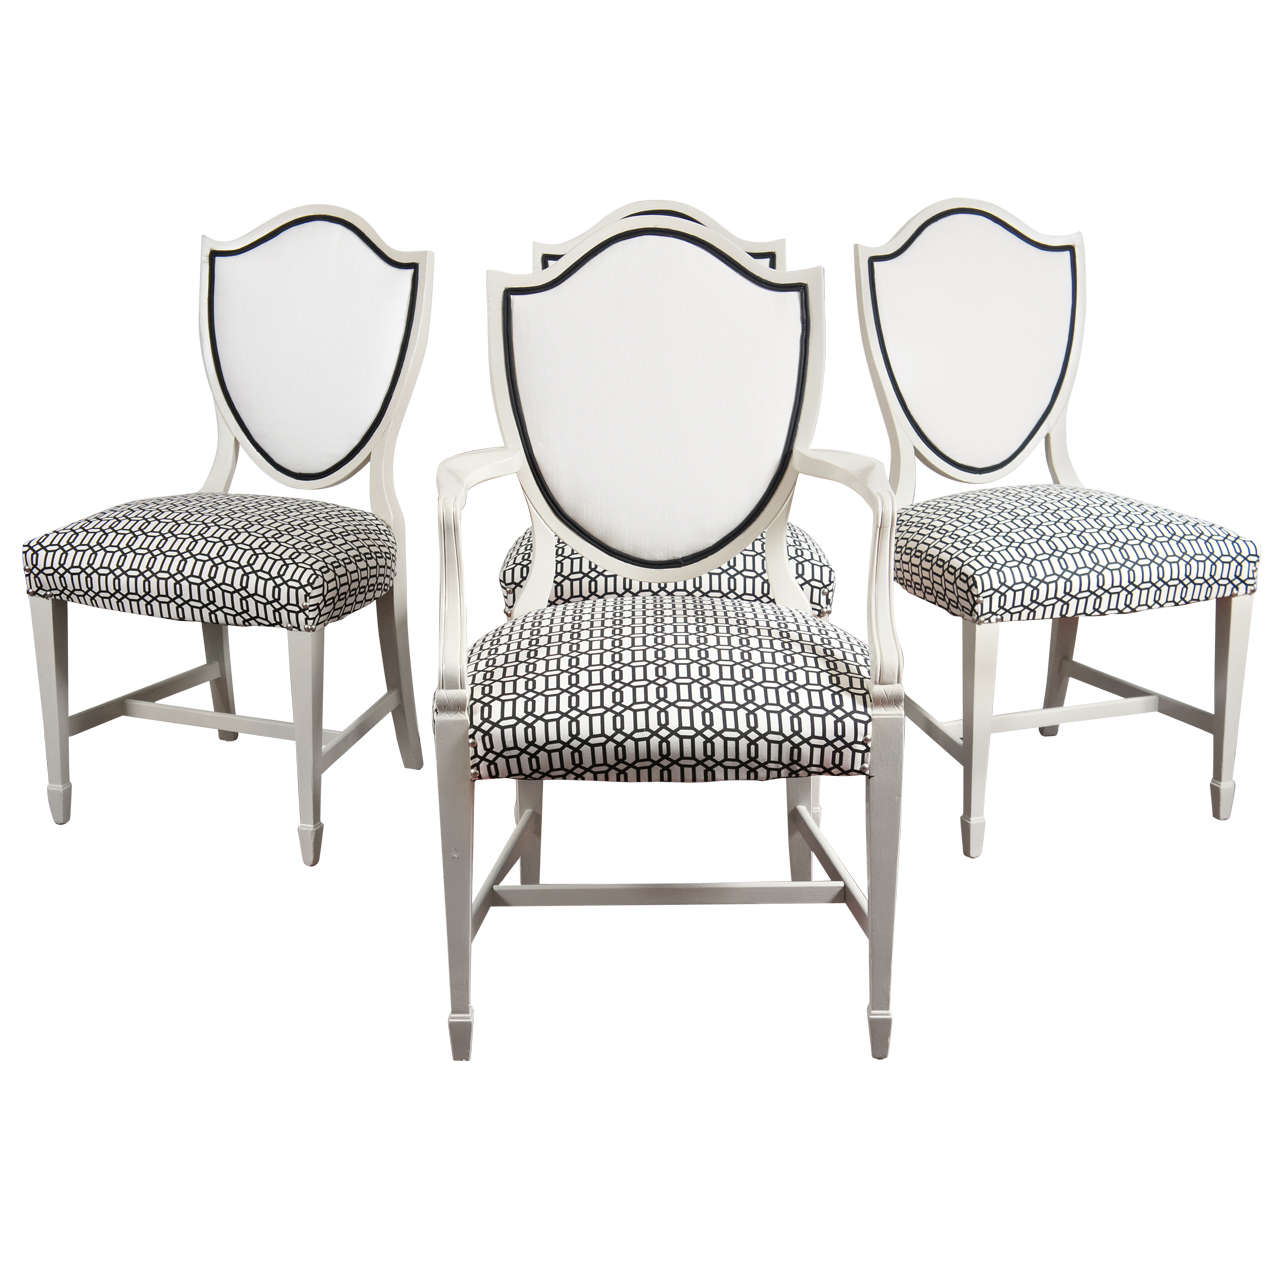 Four Adams Shield-Back Style Chairs